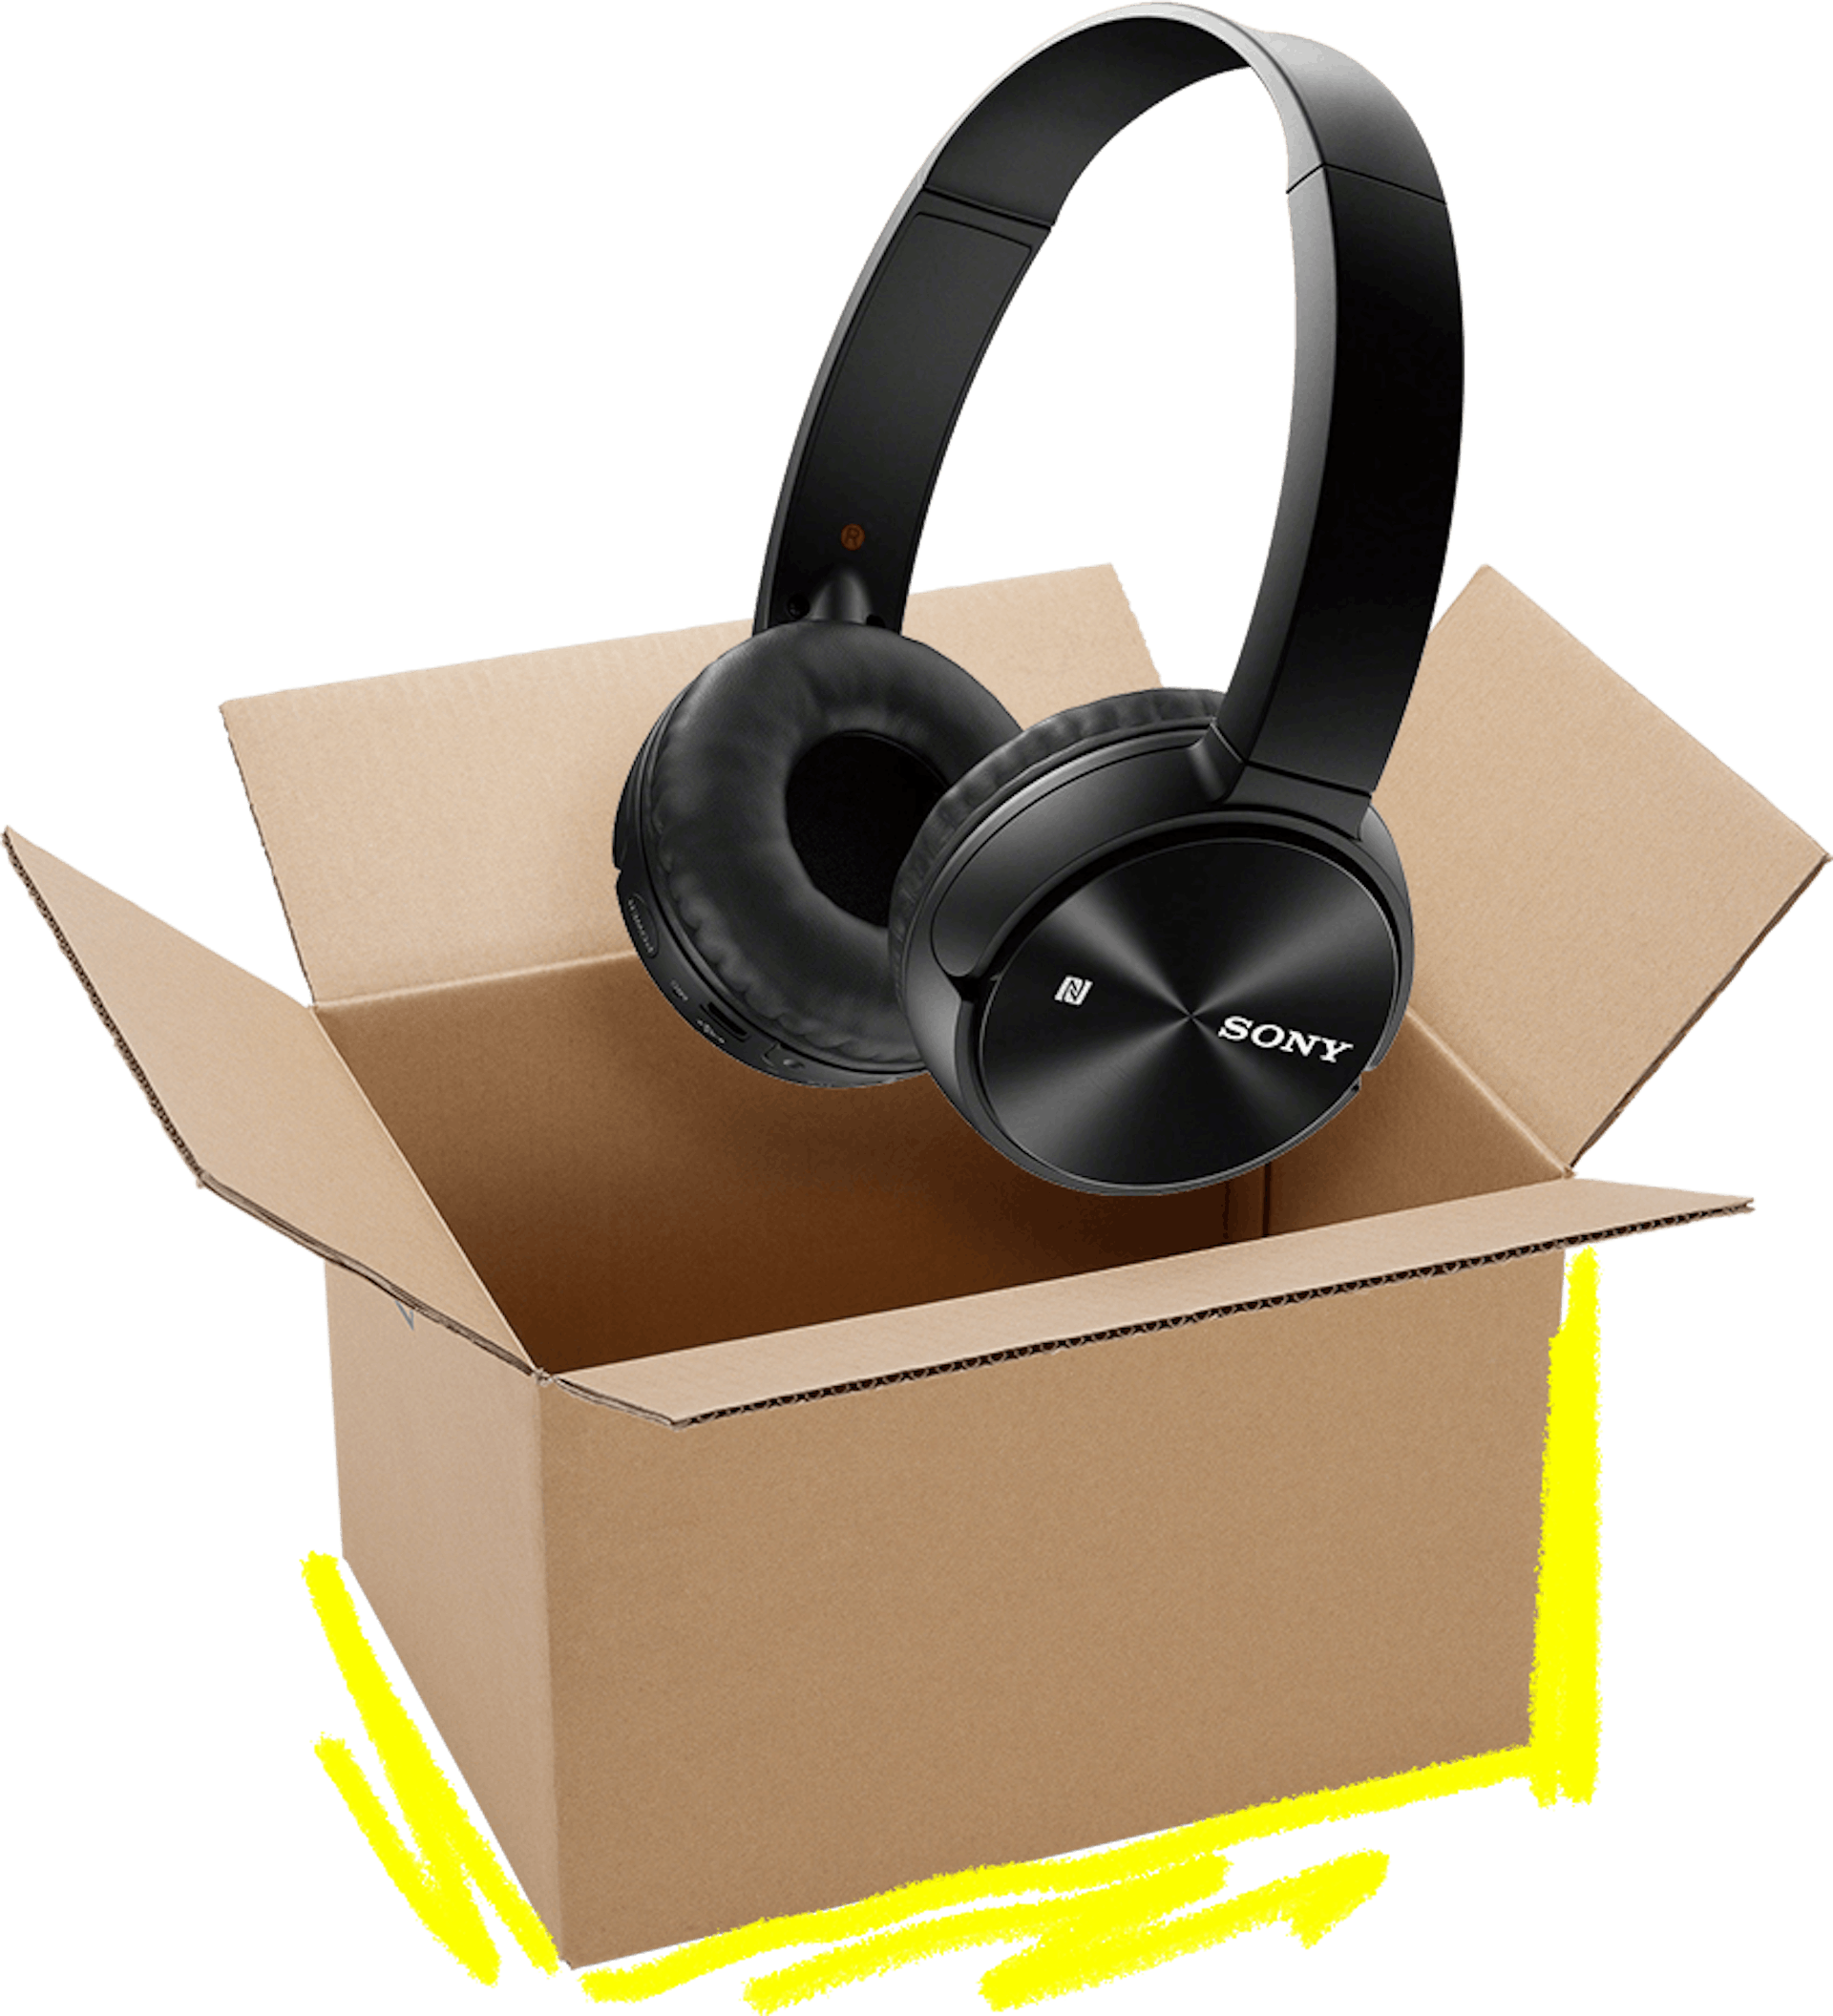 headphones come out of the box